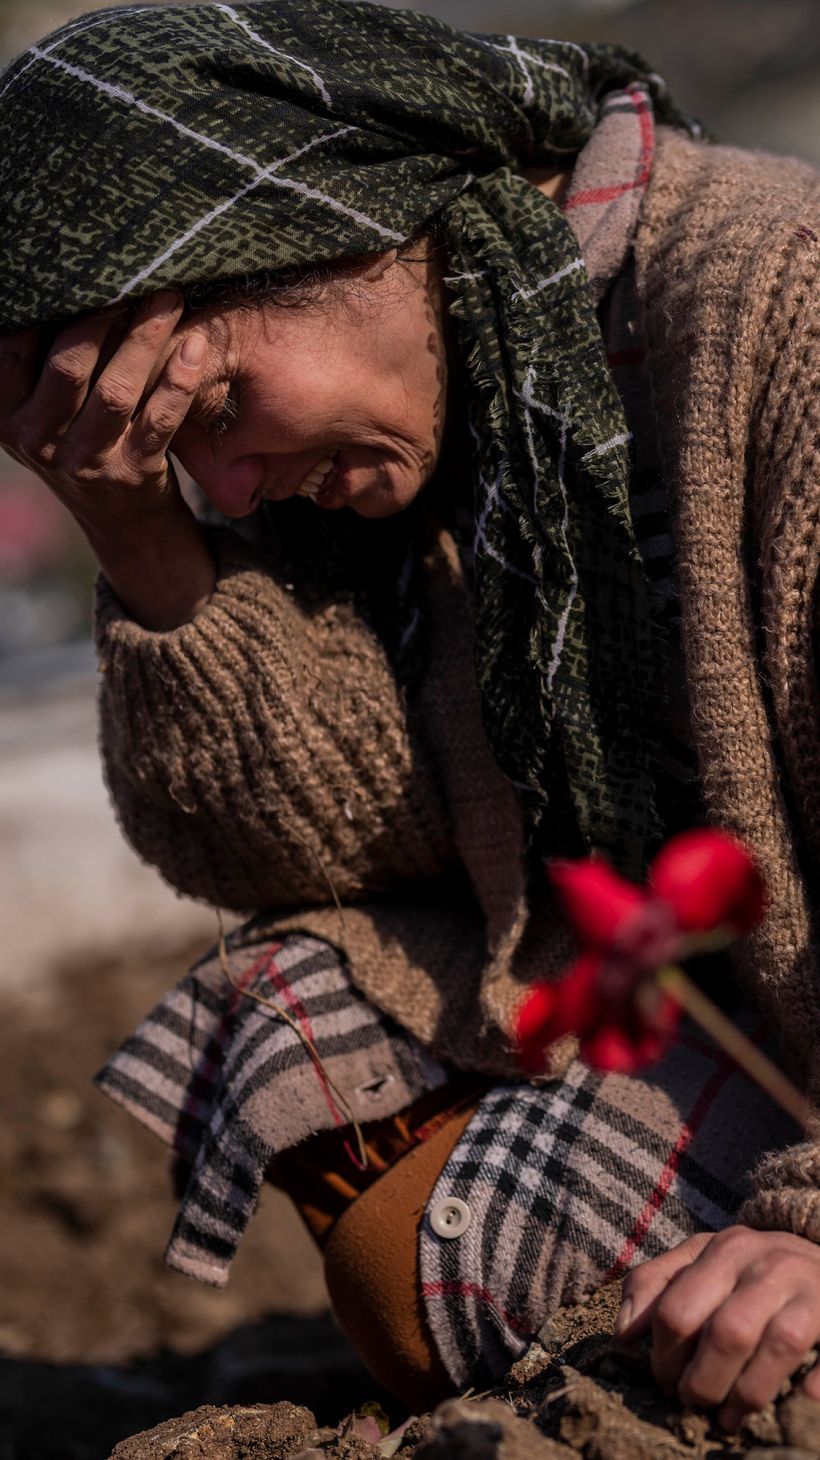 A member of the Vehibe family mourns a relative during the burial of one of the earthquake victims that struck a border region of Turkey and Syria five days ago in Antakya